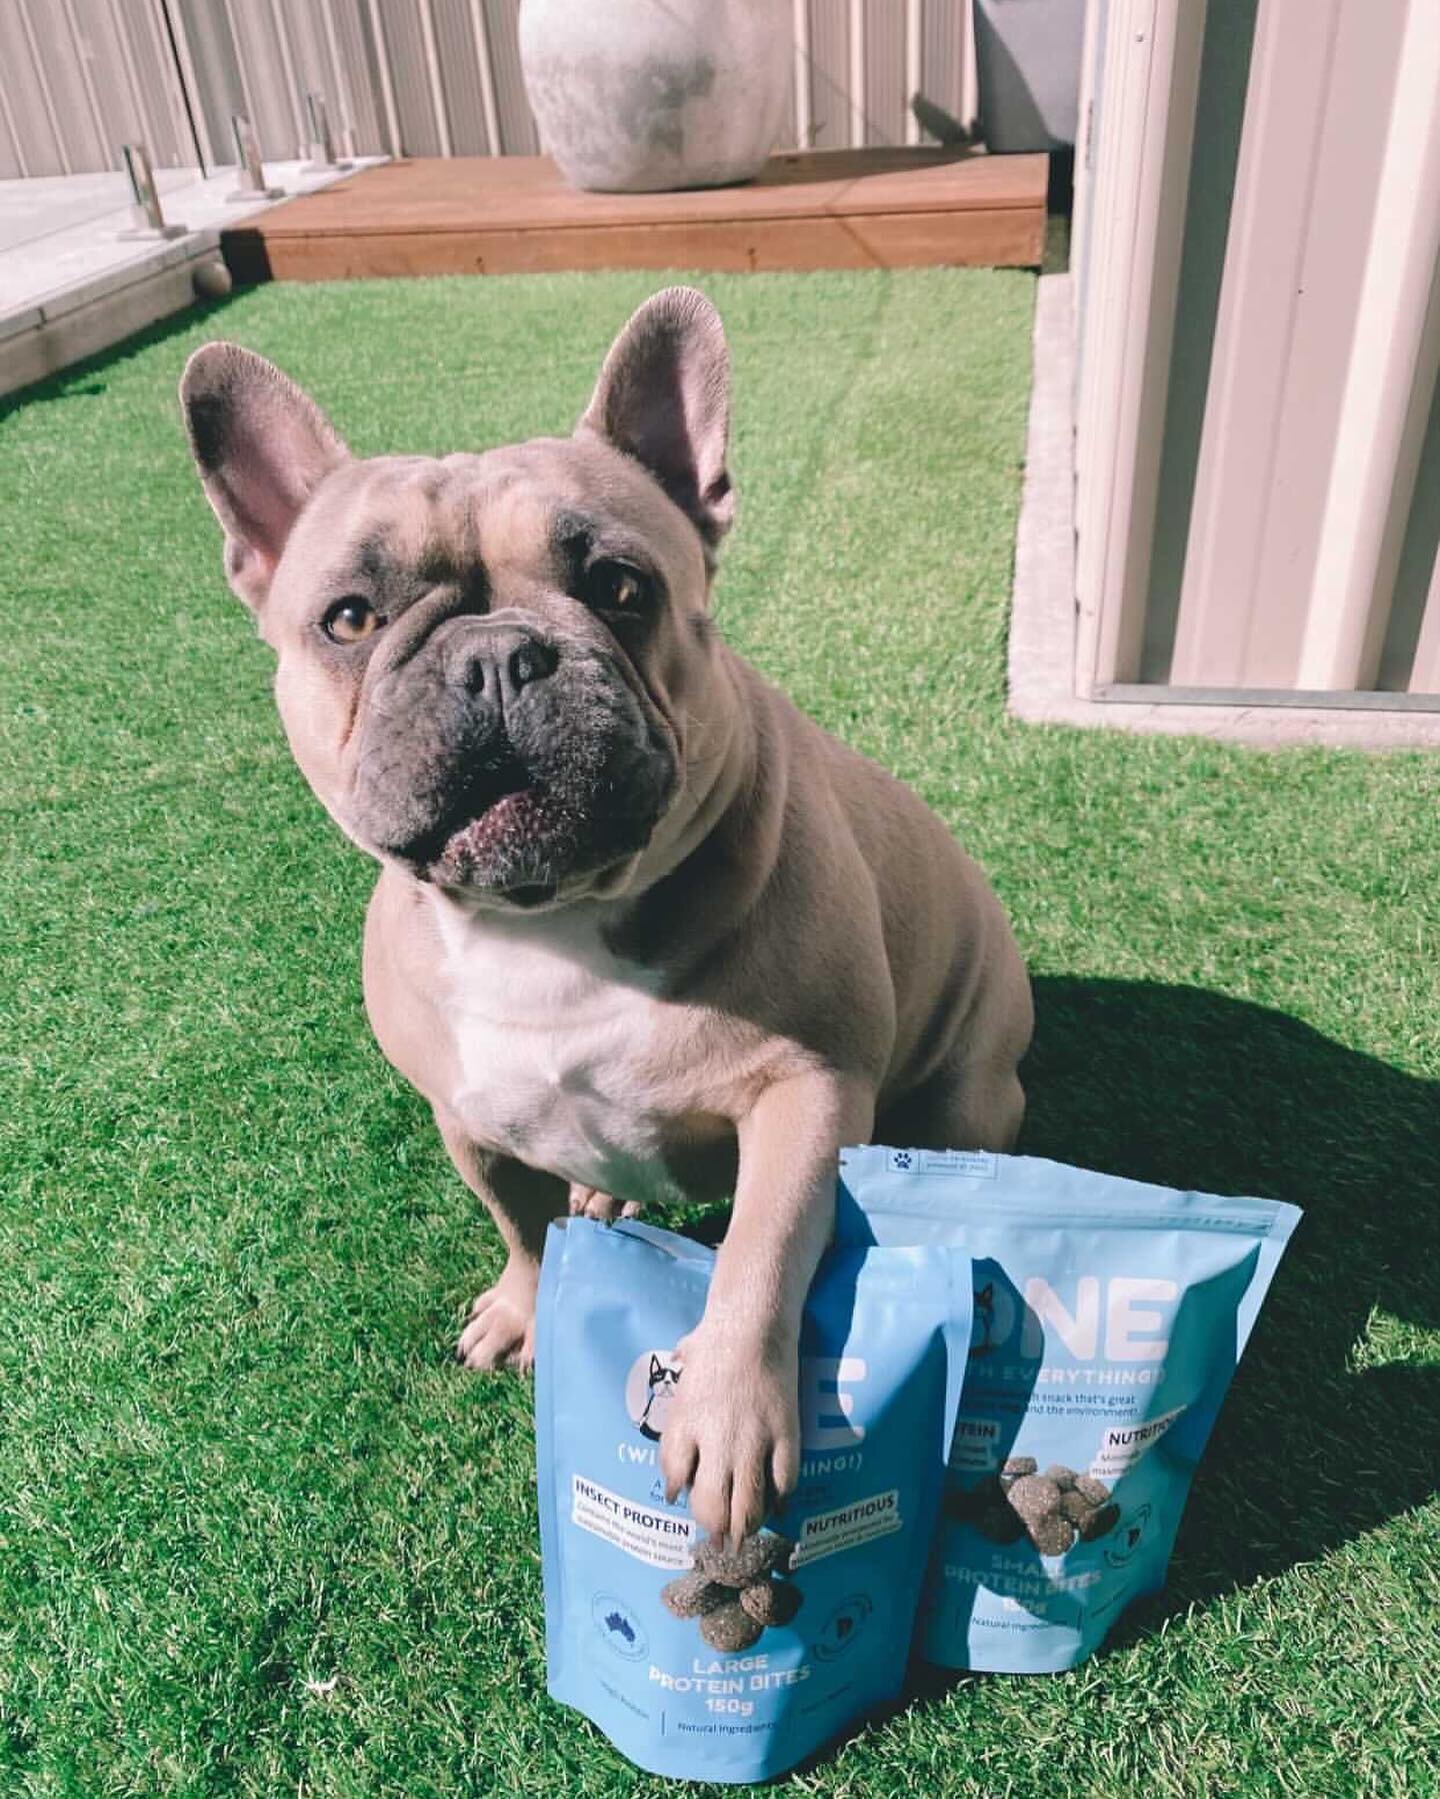 Sometimes treats are too good to share&hellip; #priorities 

@thor.ivy.harlow_de_frenchies 

#onepets #insectprotein #australianmade #ecodog #sustainability #circulareconomy #frenchiesofinstagram #frenchbulldog